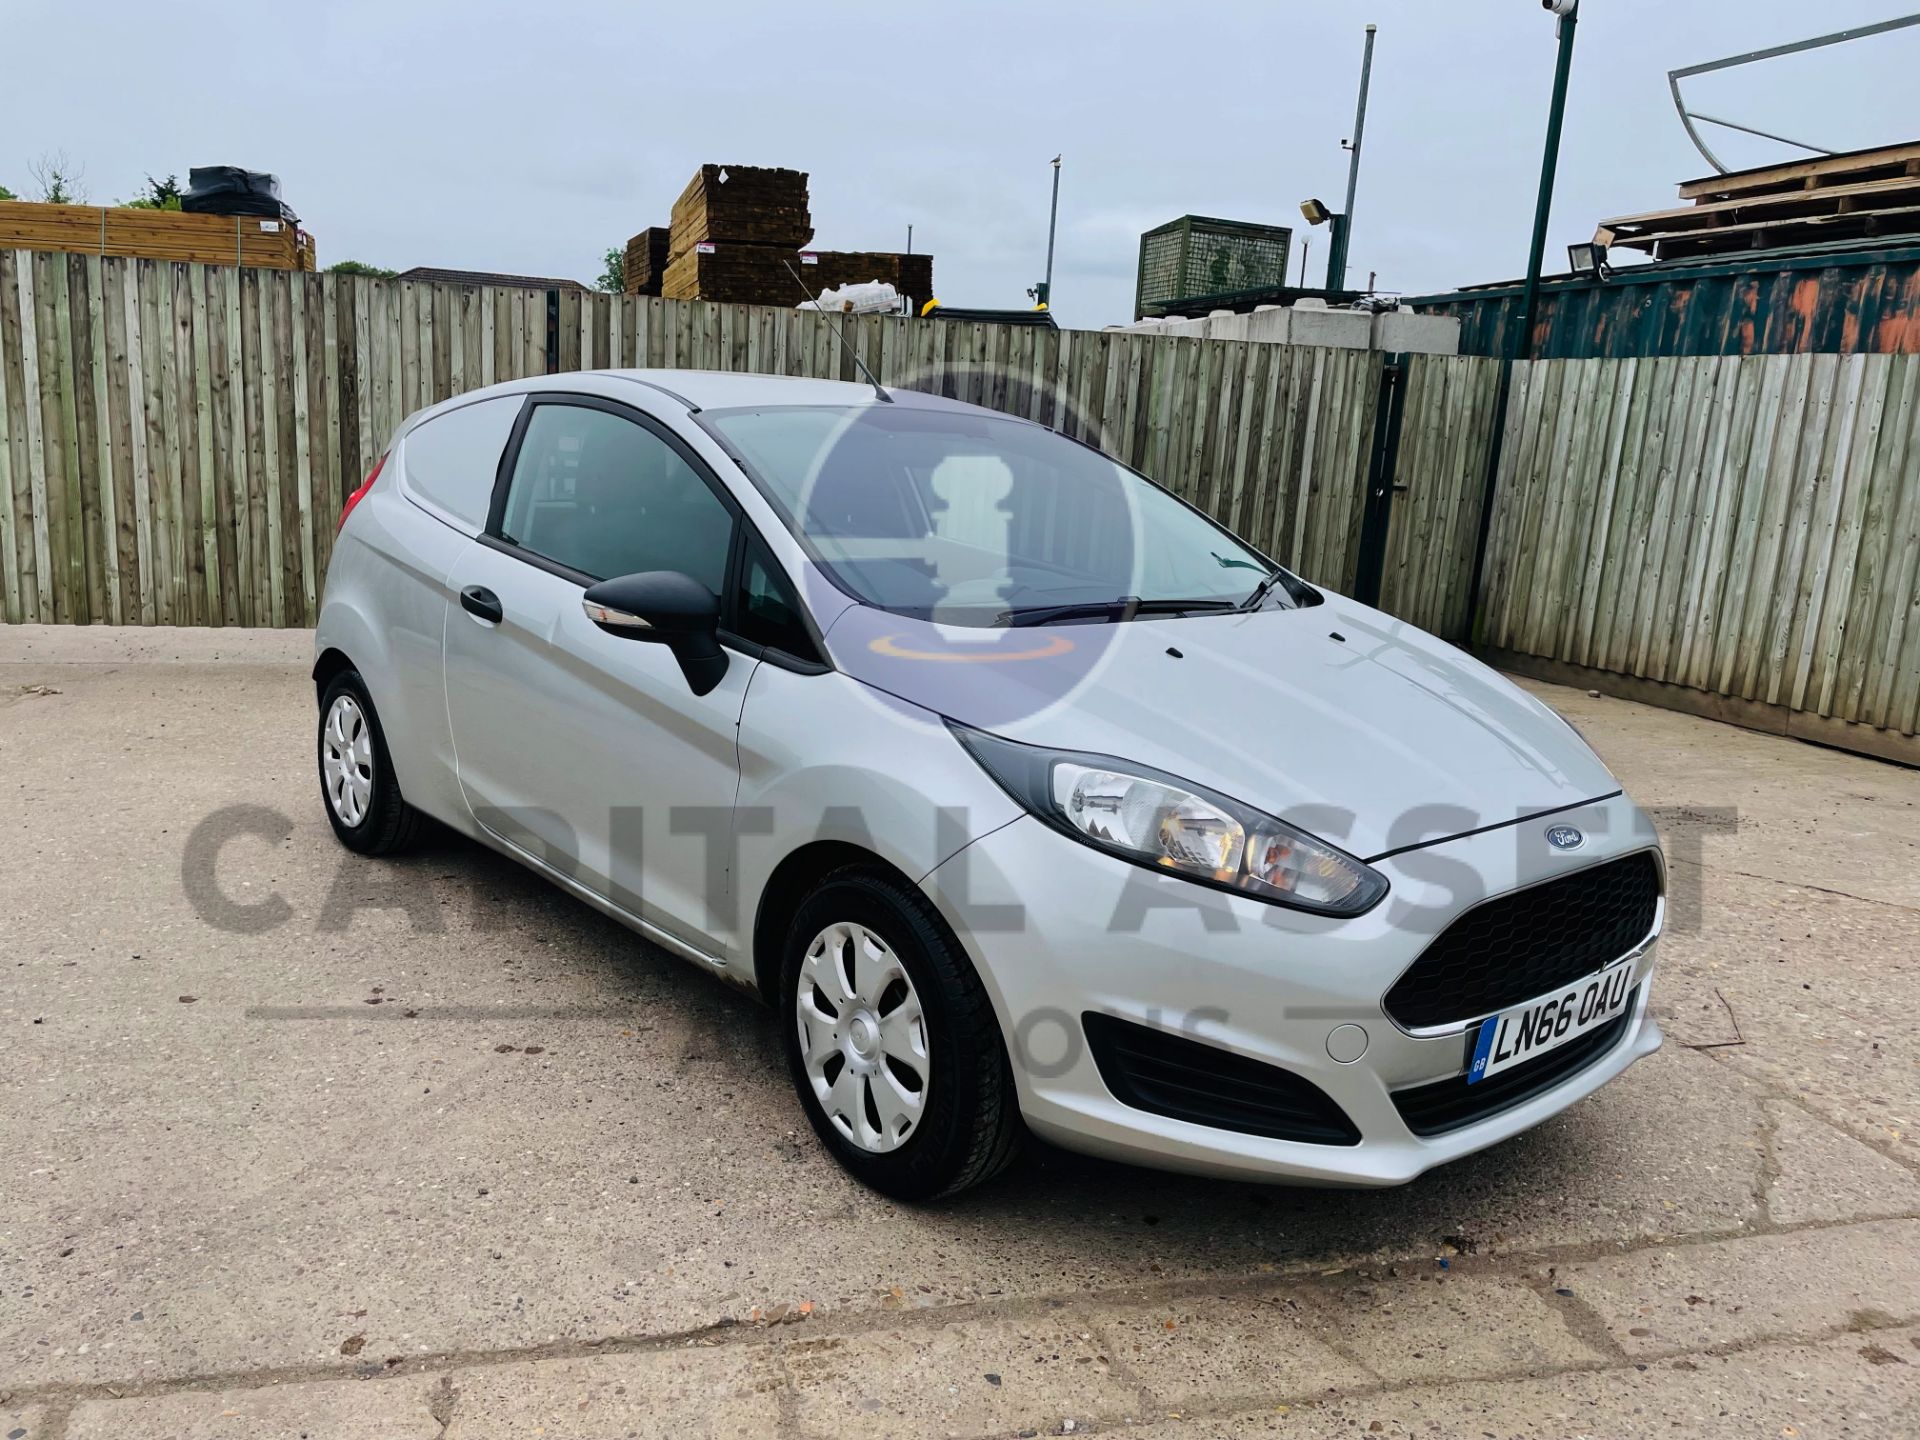 FORD FIESTA *LCV - PANEL VAN* (2017 - EURO 6) 1.5 TDCI - AUTO STOP/START (1 OWNER) *AIR CON* - Image 4 of 38